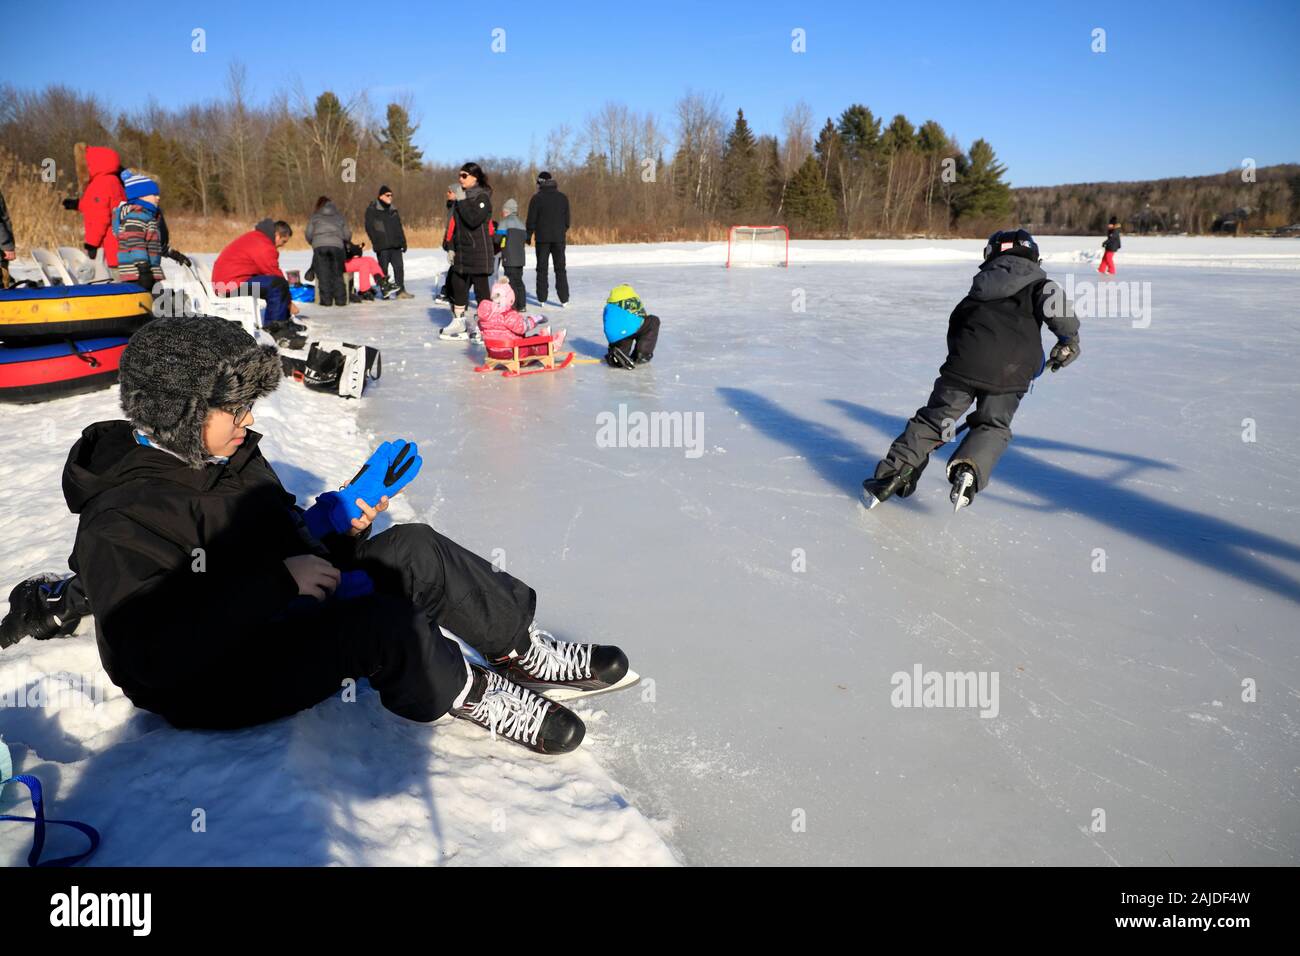 Local residents playing ice hockey on a frozen lake.Mont Orford National Park.Orford.Eastern Townships.Quebec.Canada Stock Photo